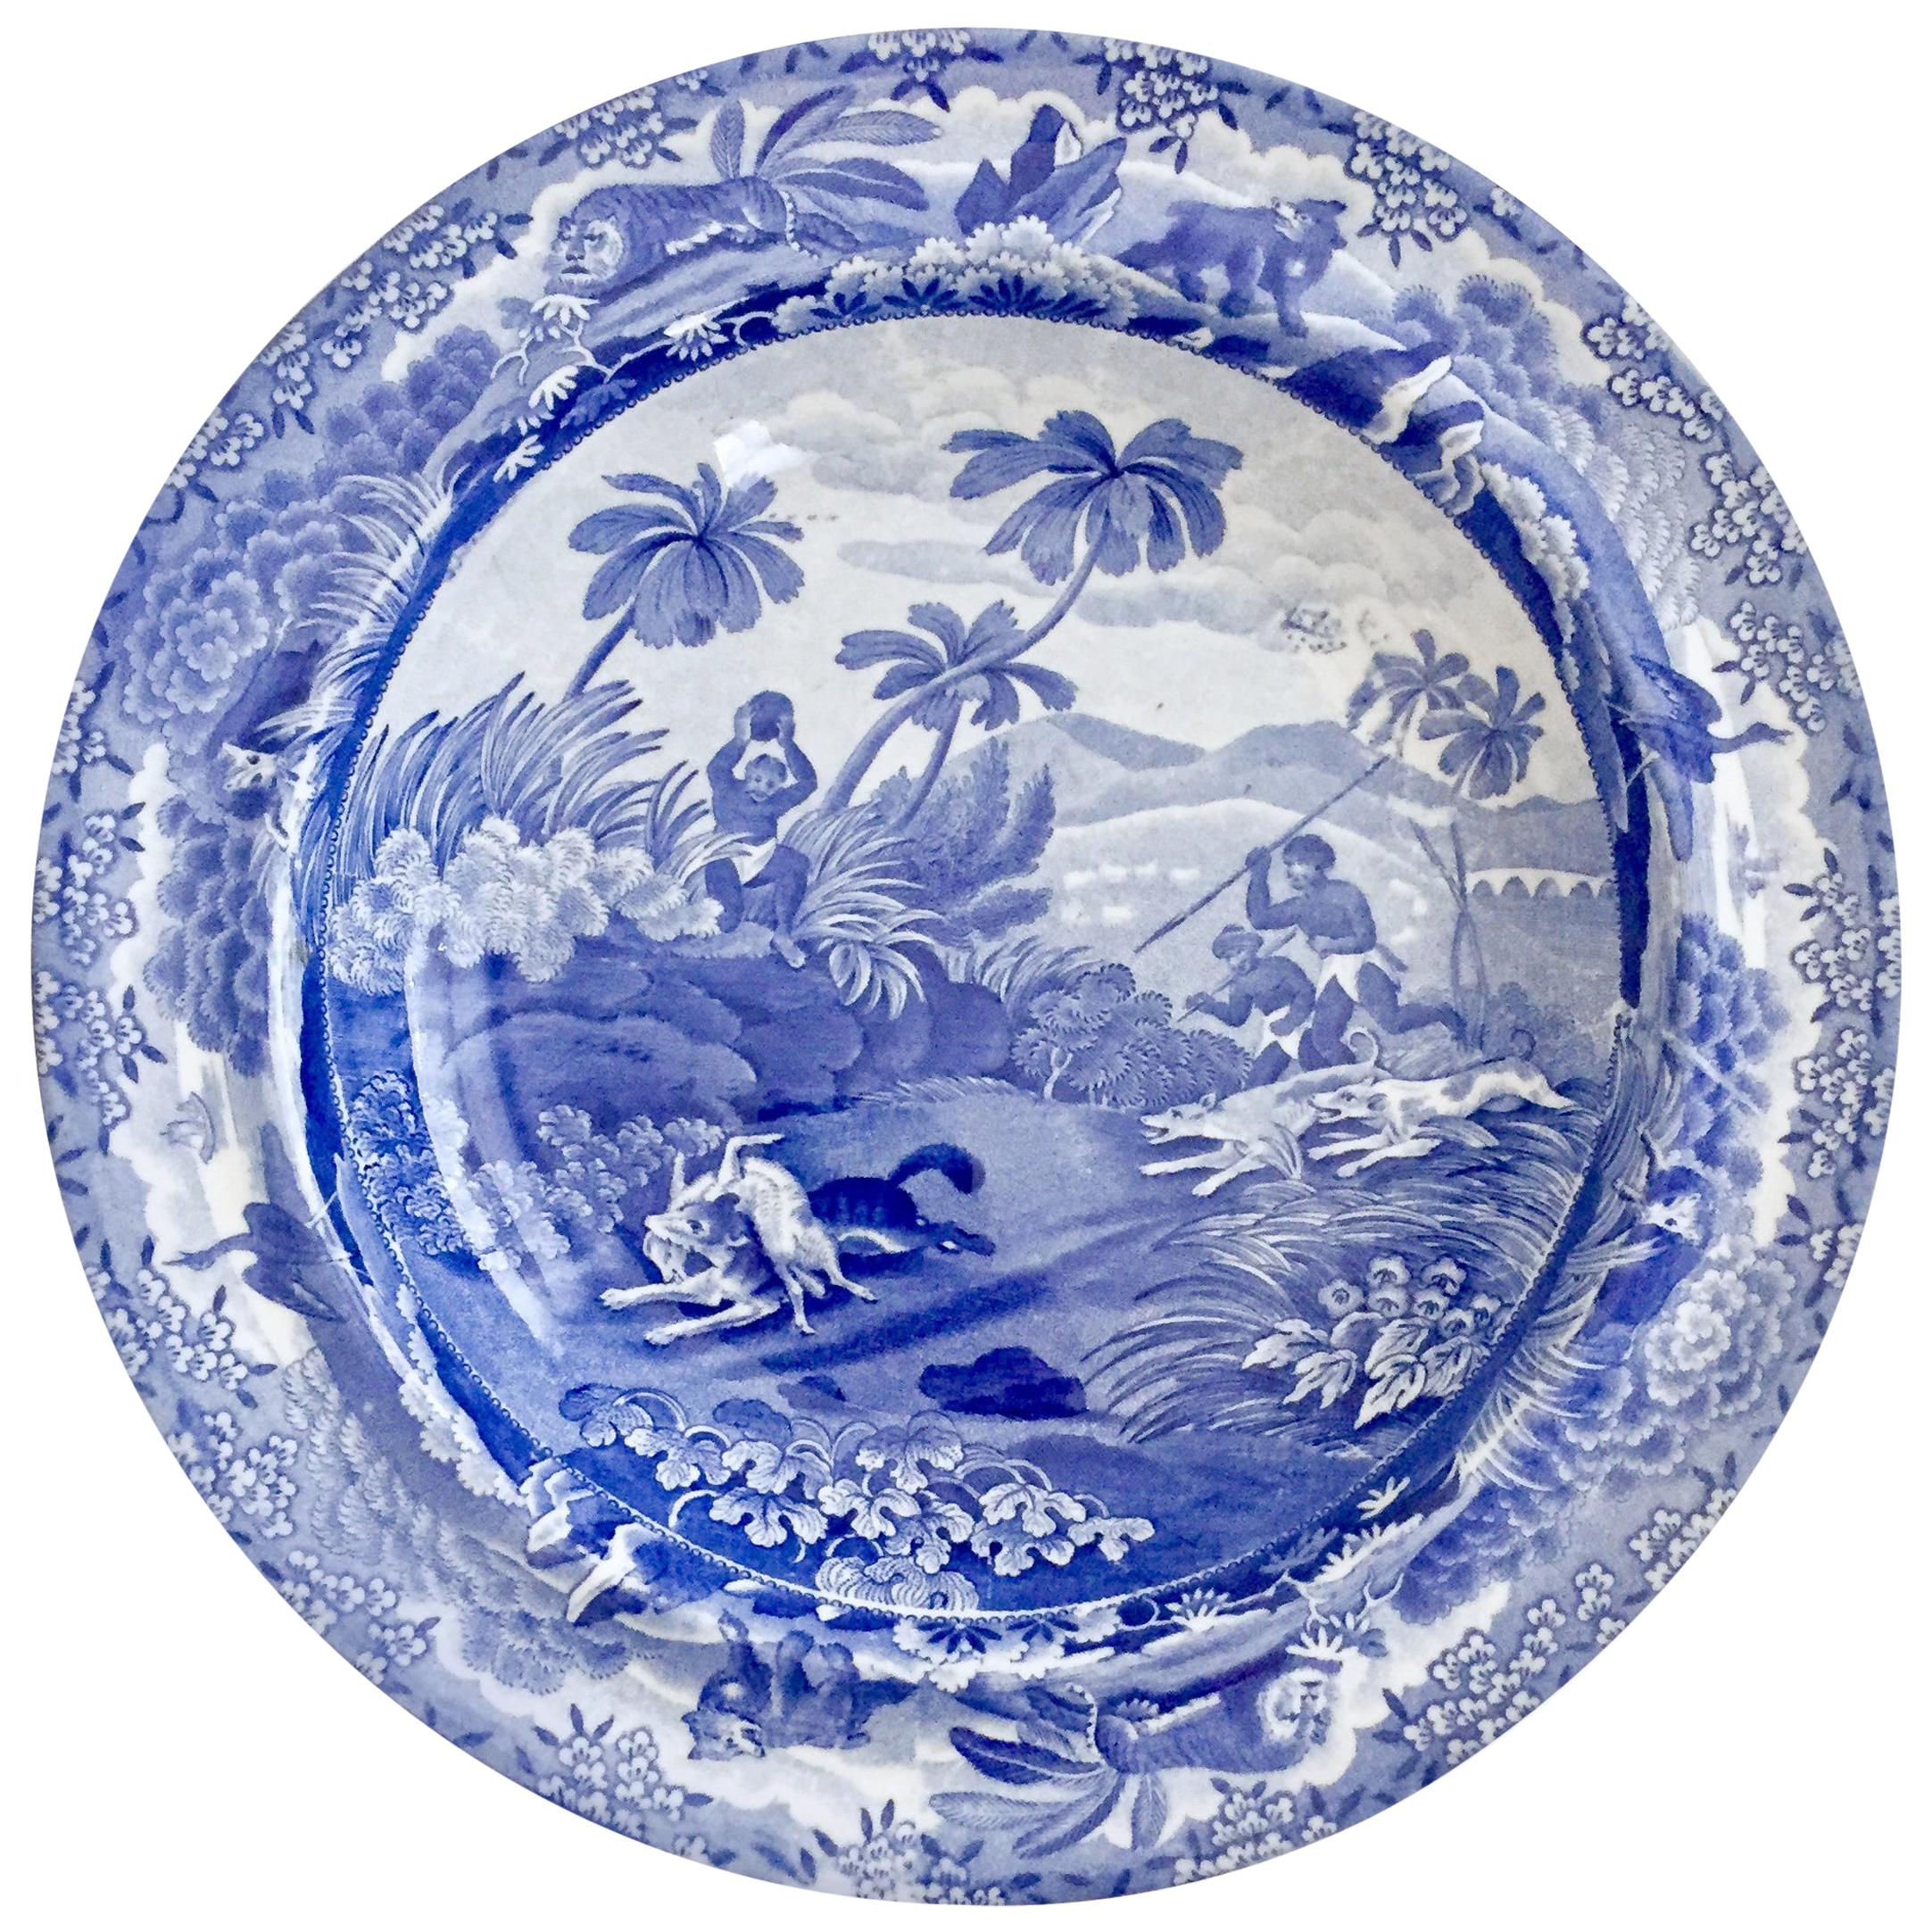 Spode Pearlware Soup Plate, Blue and White "Chase After A Wolf", 1815-1833